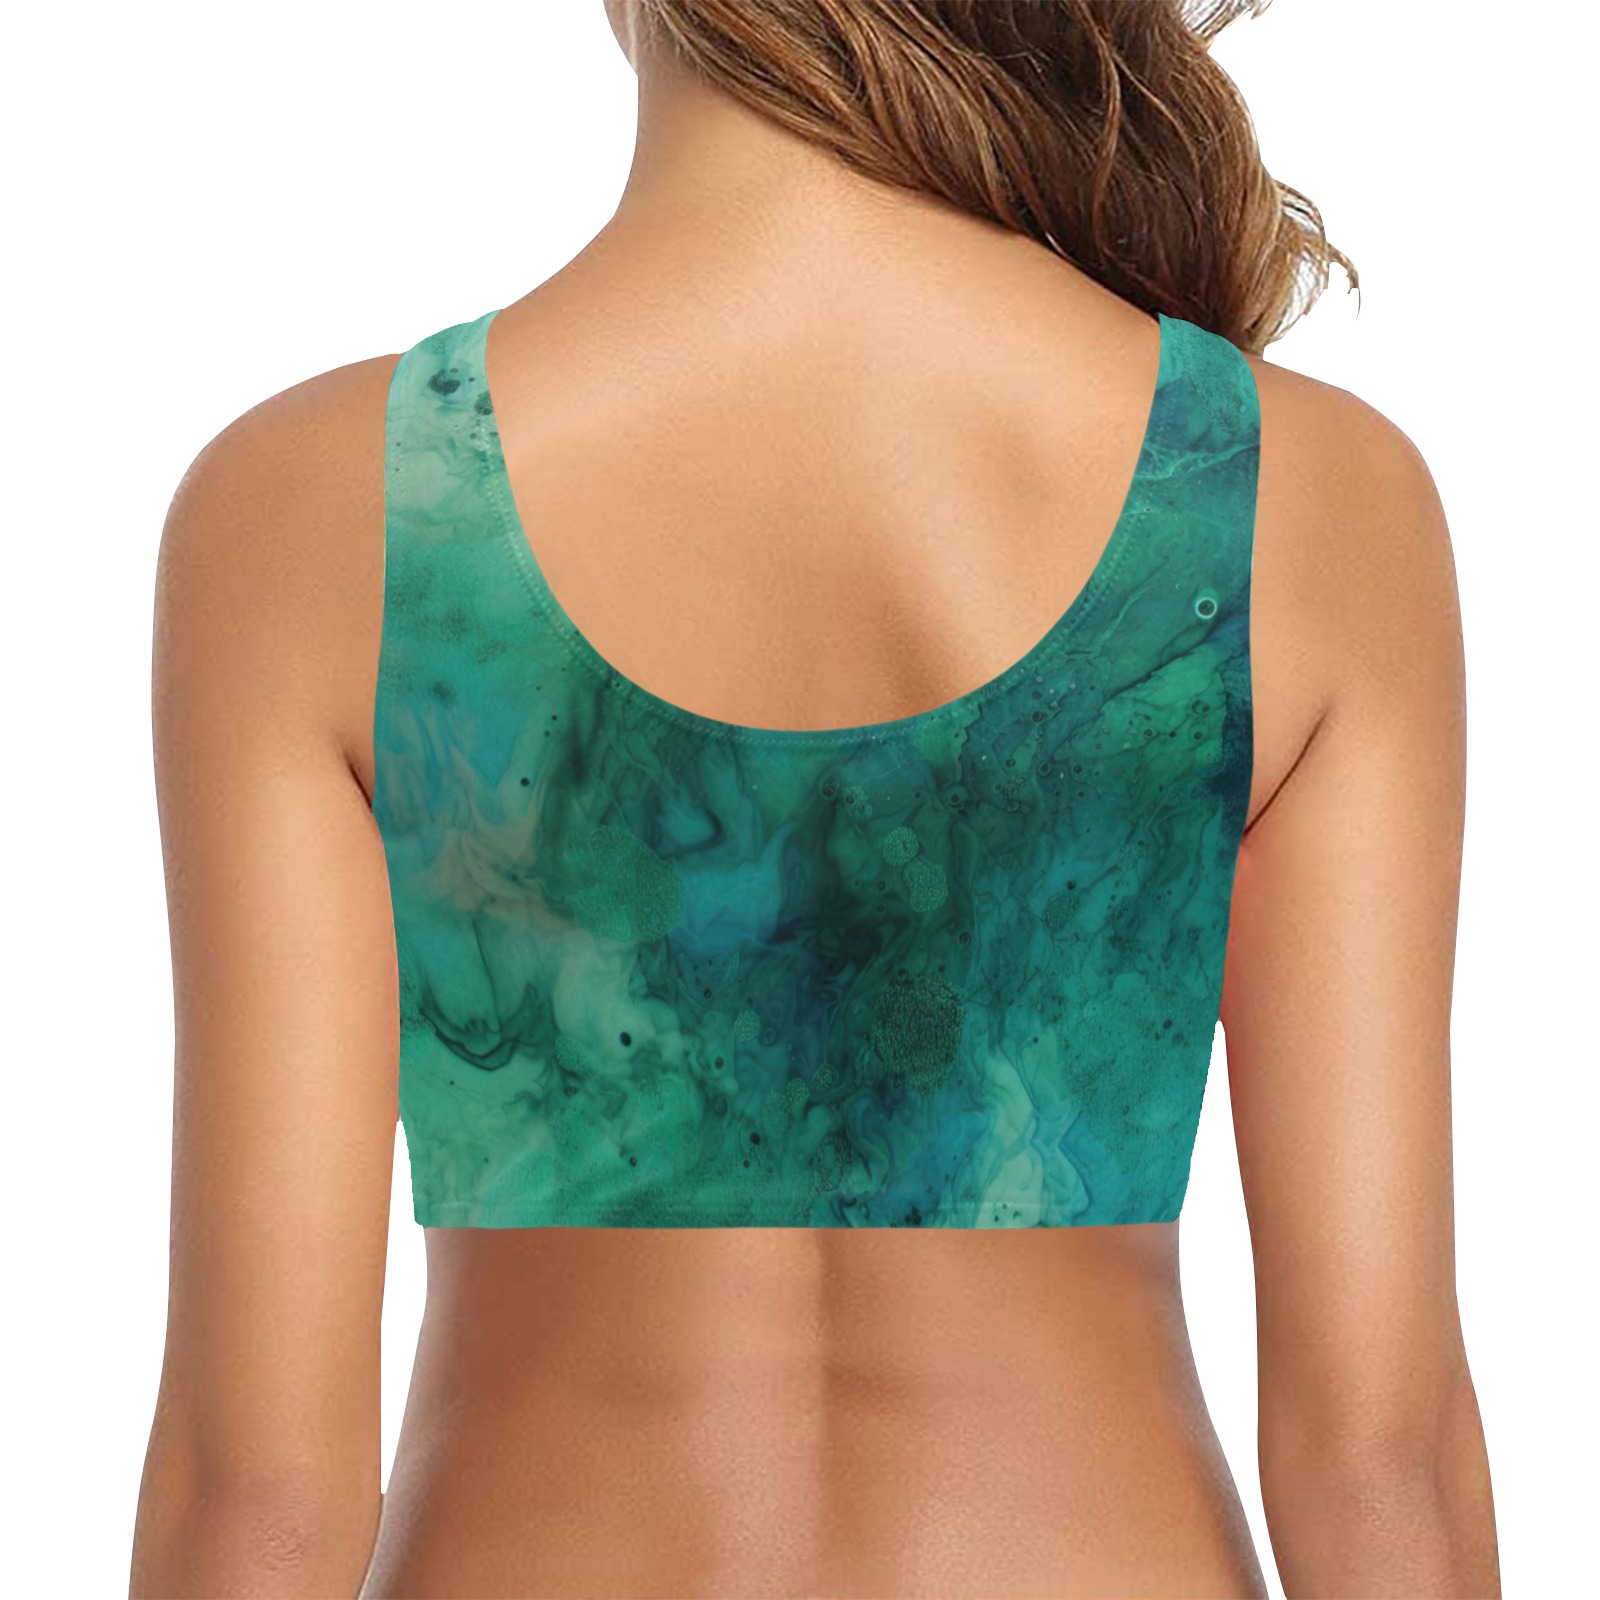 CG_a_green_and_blue_textured_surface_in_the_style_of_fluid_ink__8ea3f316-602e-4f64-bcf8-c283f84ca5b3 Chest Bowknot Bikini Top (Model S33)